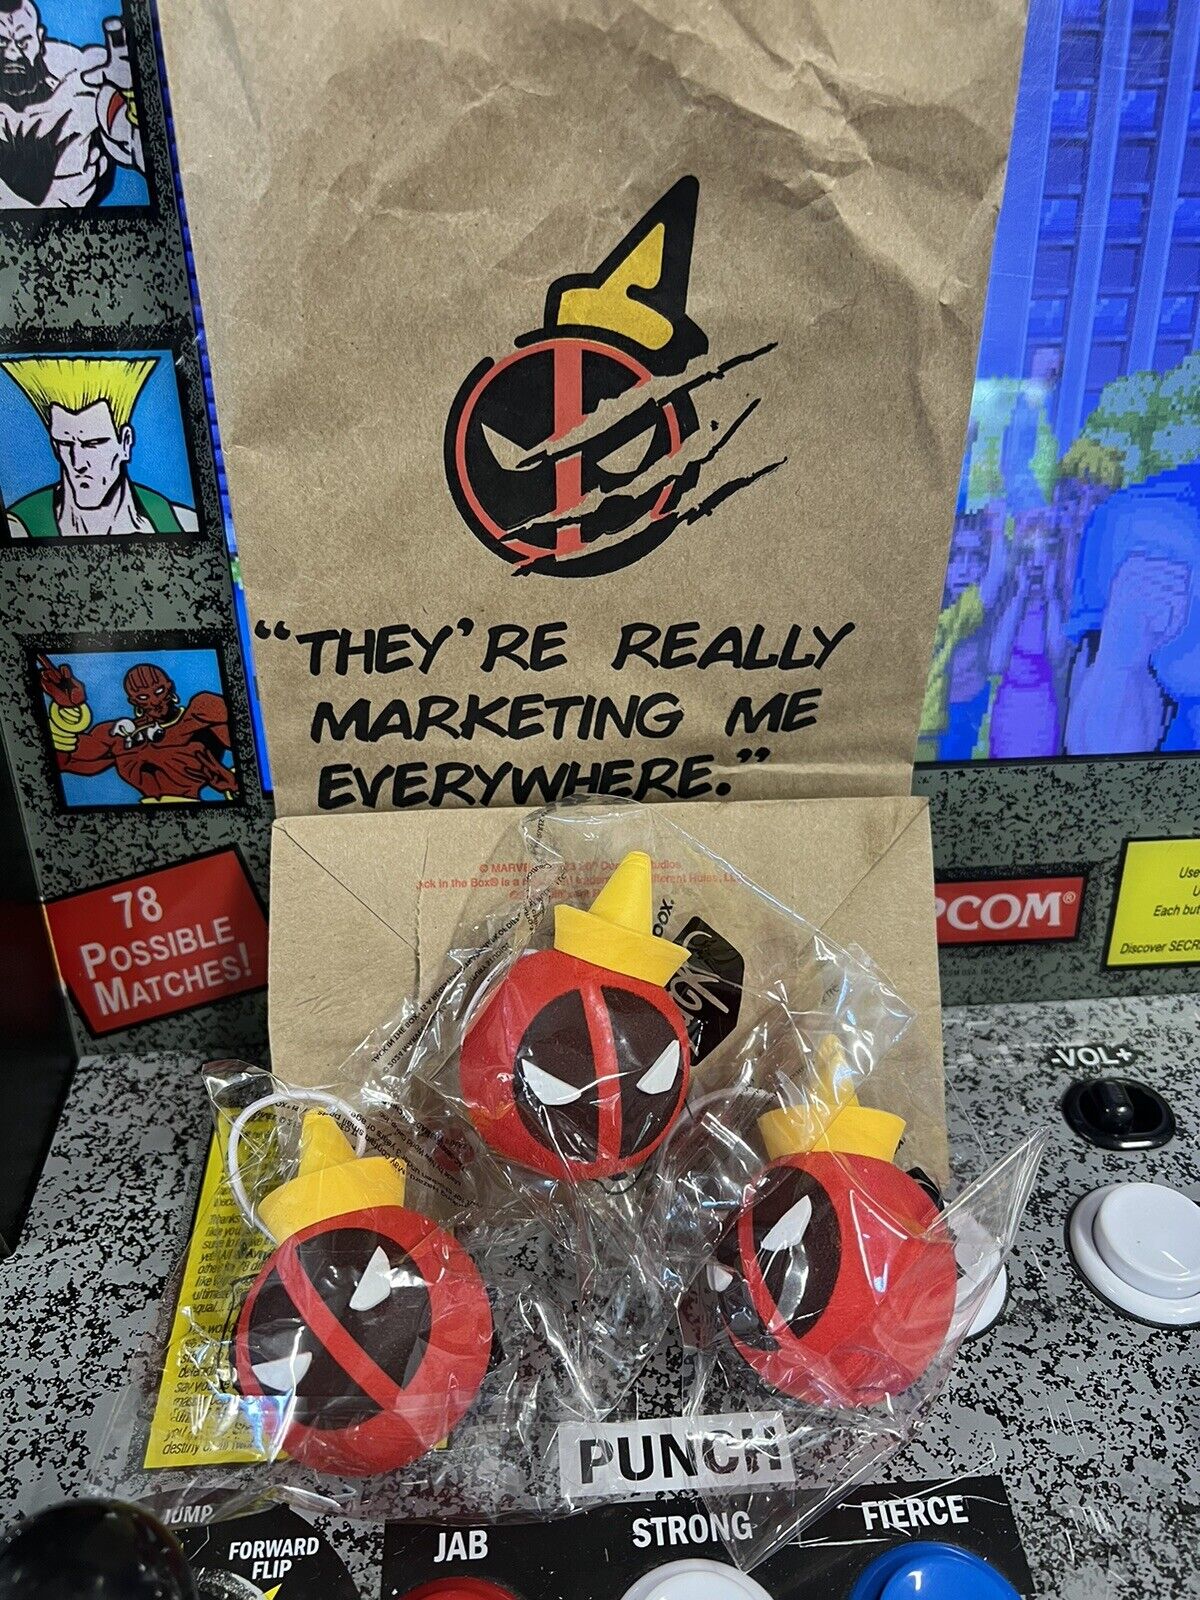 Lot of 3: Jack in the Box Deadpool Antenna Ball BRAND NEW SEALED Wolverine